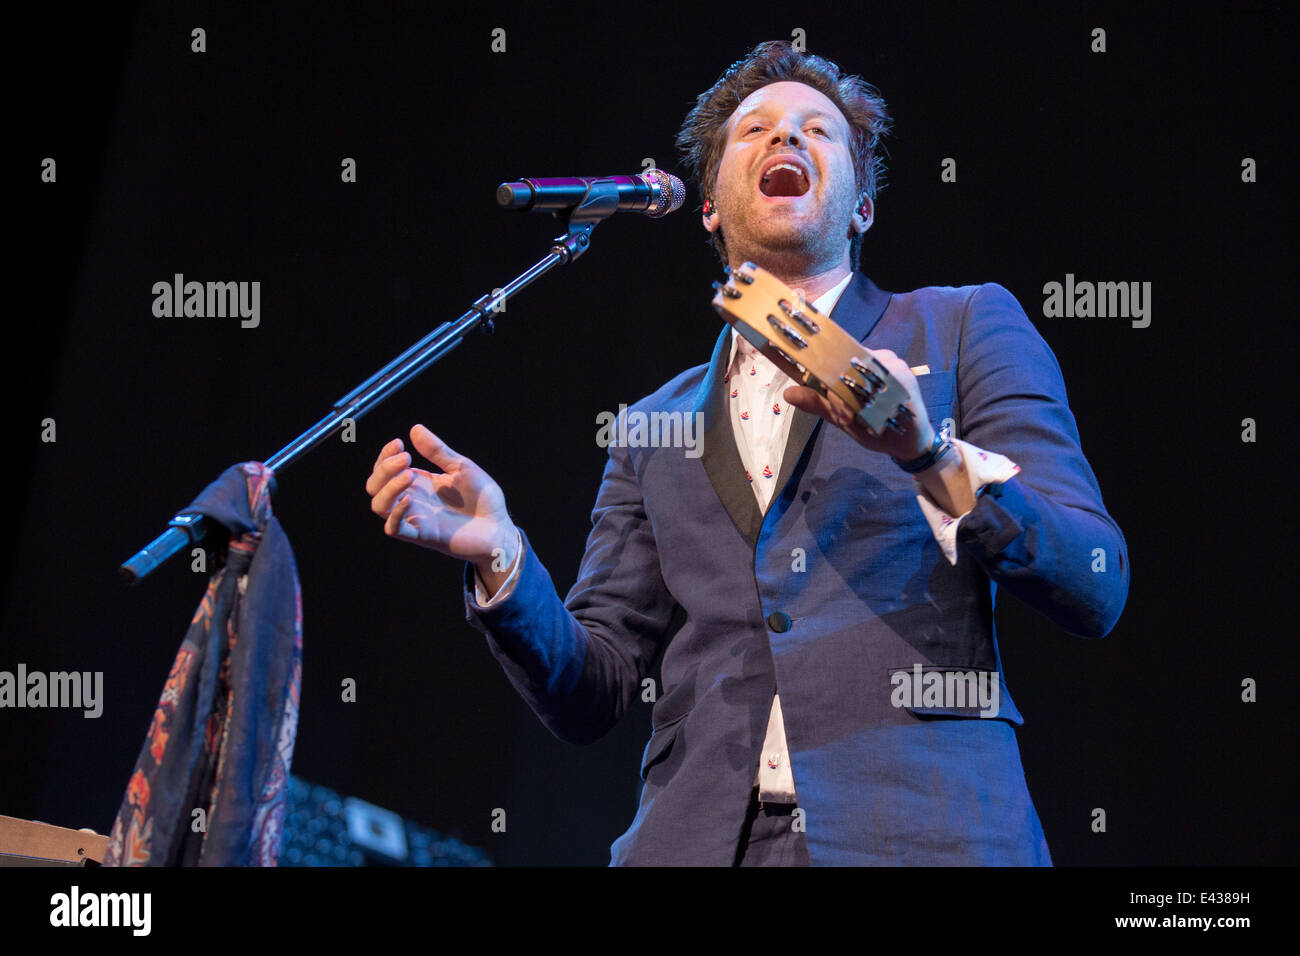 July 1, 2014 - Milwaukee, Wisconsin, U.S - MAYER HAWTHORNE (aka ANDREW MAYER COHEN) performs live at the 2014 Summerfest Music Festival in Milwaukee Wisconsin (Credit Image: © Daniel DeSlover/ZUMA Wire) Stock Photo